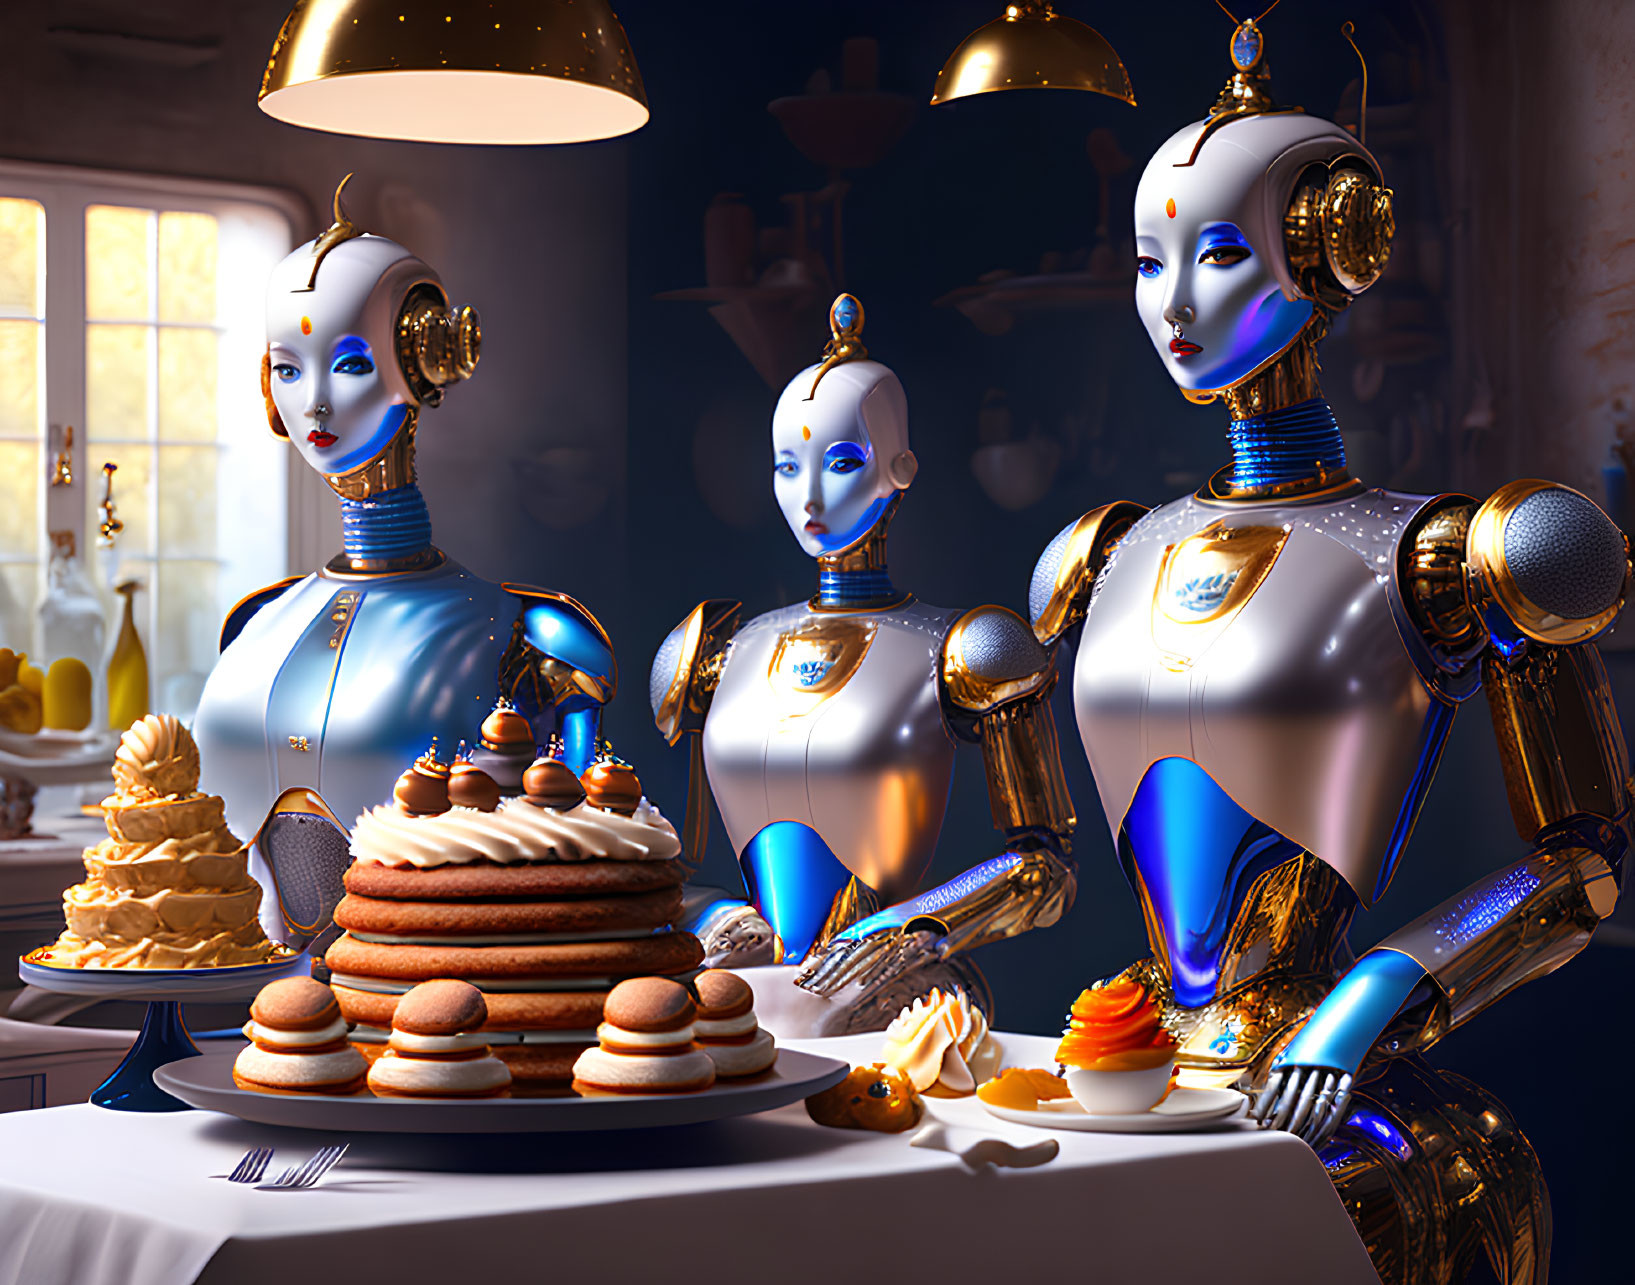 Stylized robots at table with desserts in futuristic tea party setting